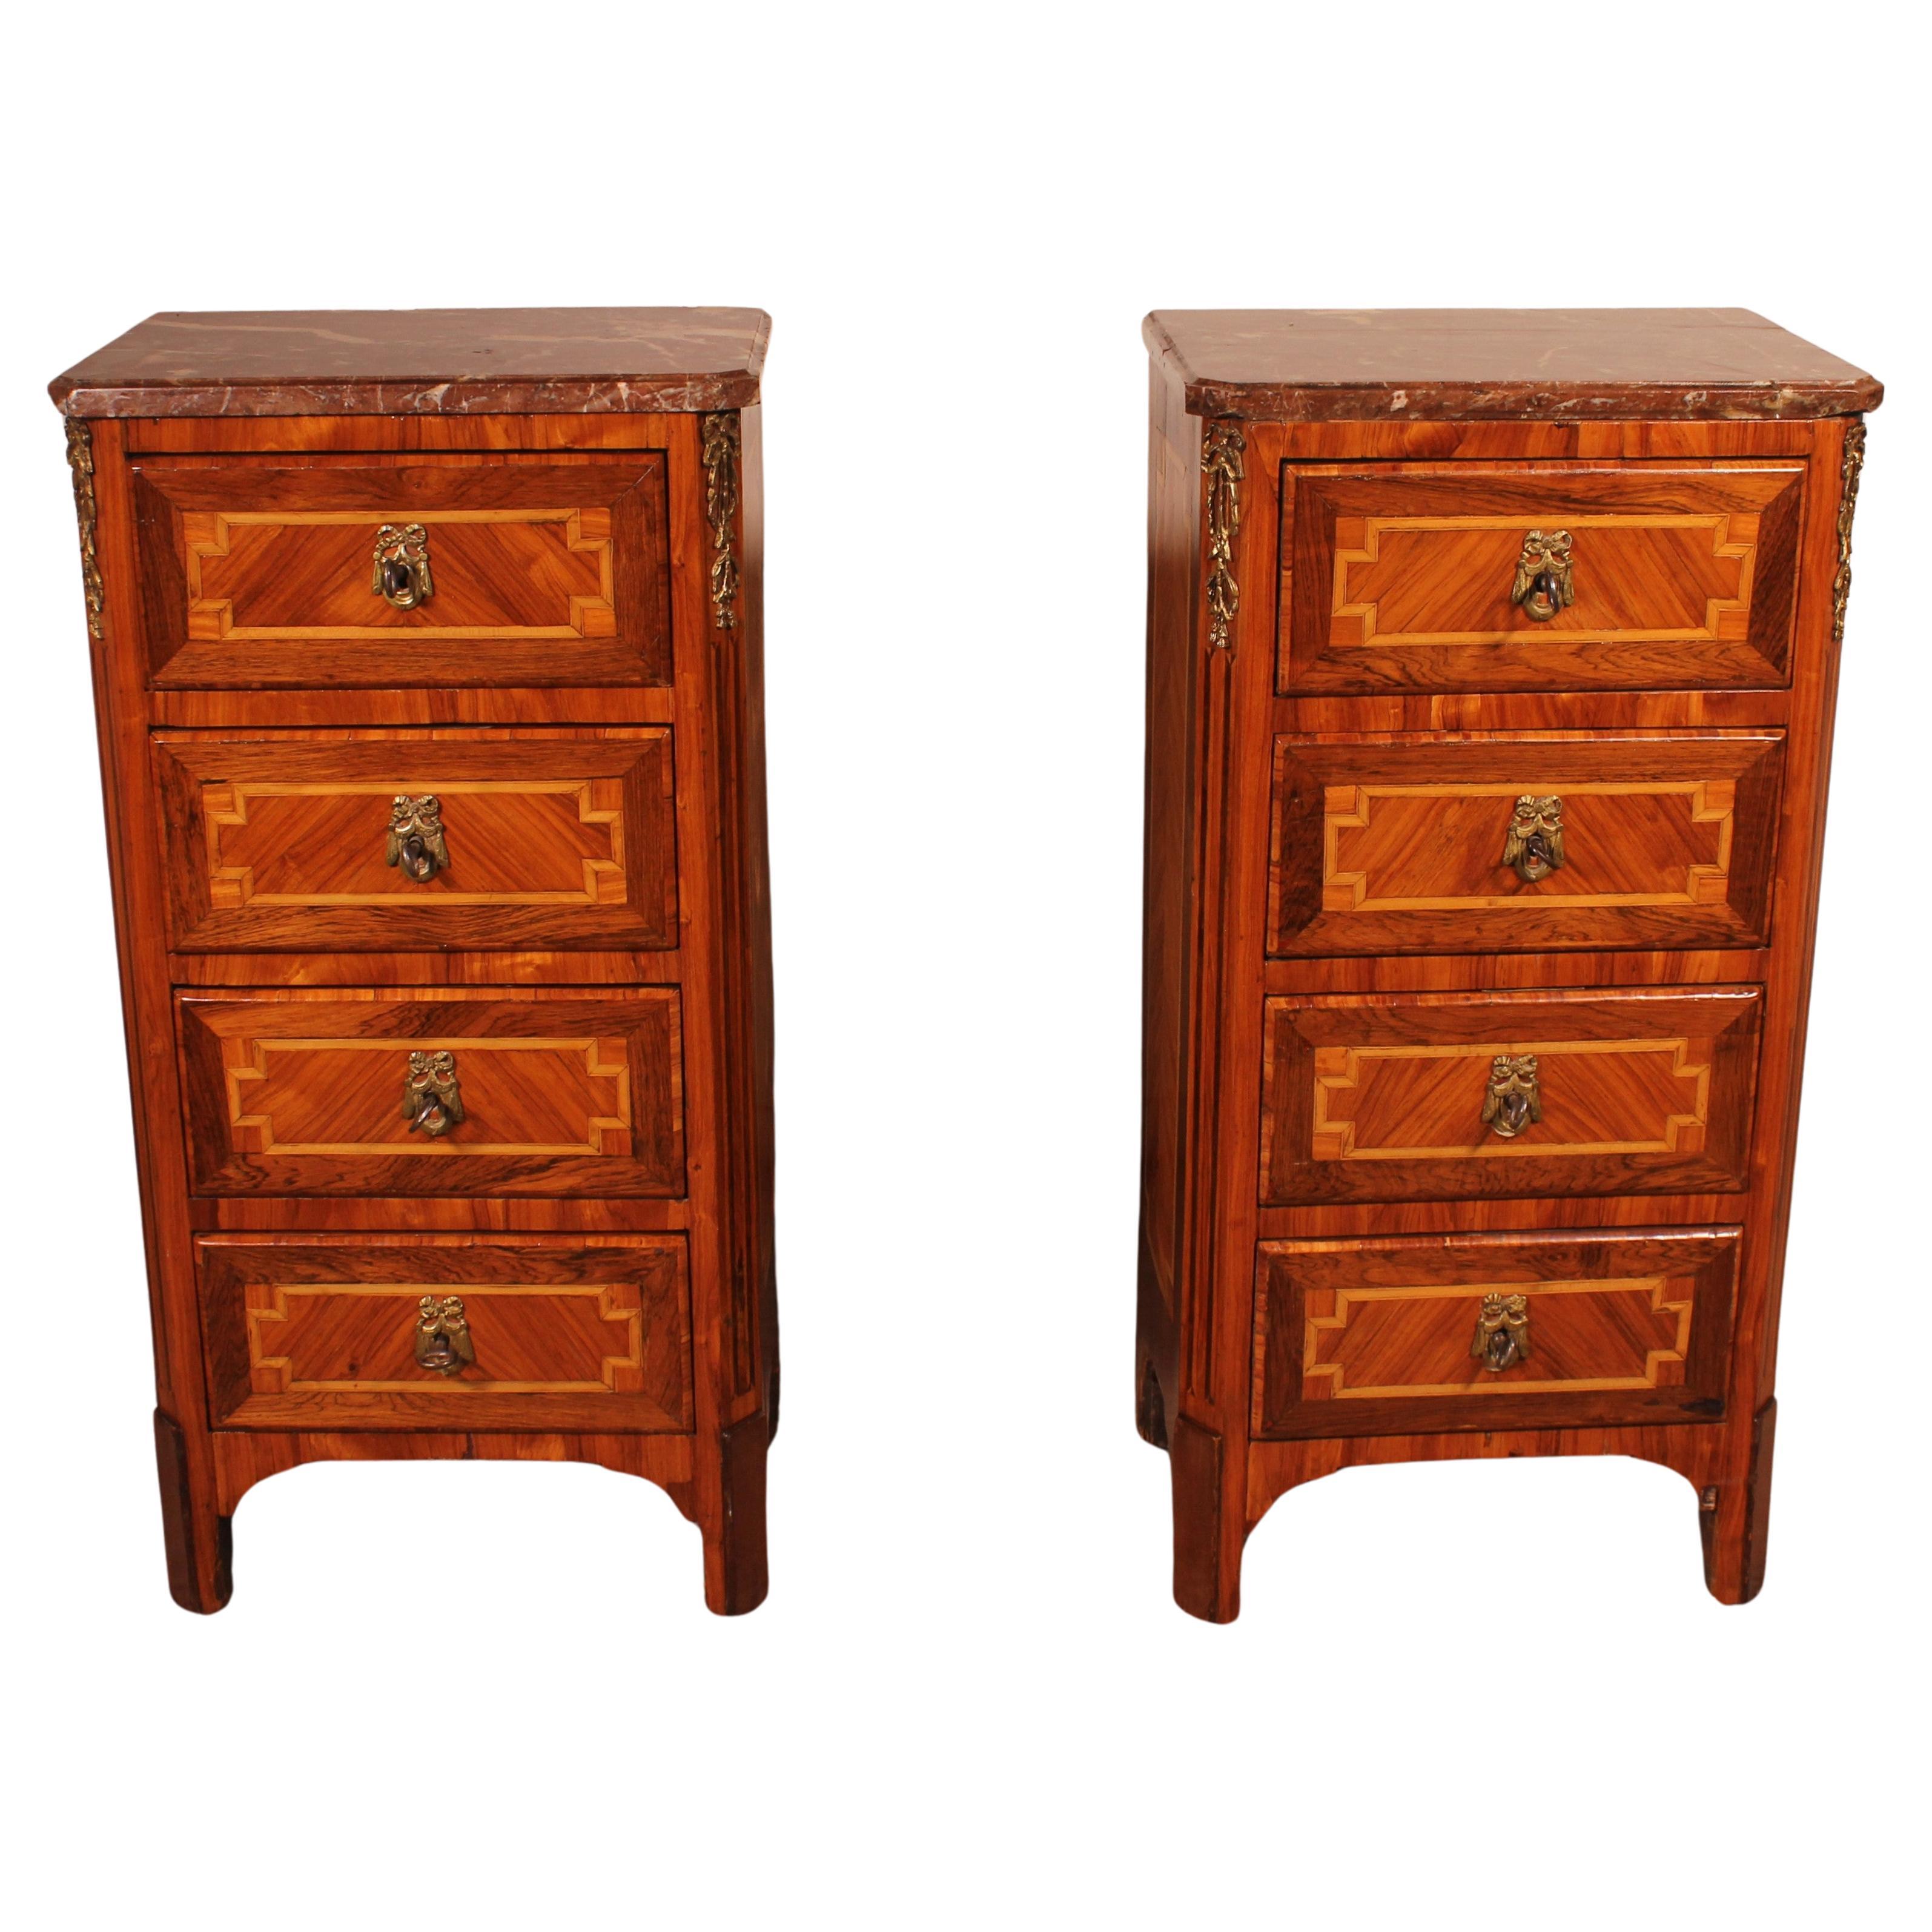 Pair Of Marquetry Bedside Tables - 18th Century From France